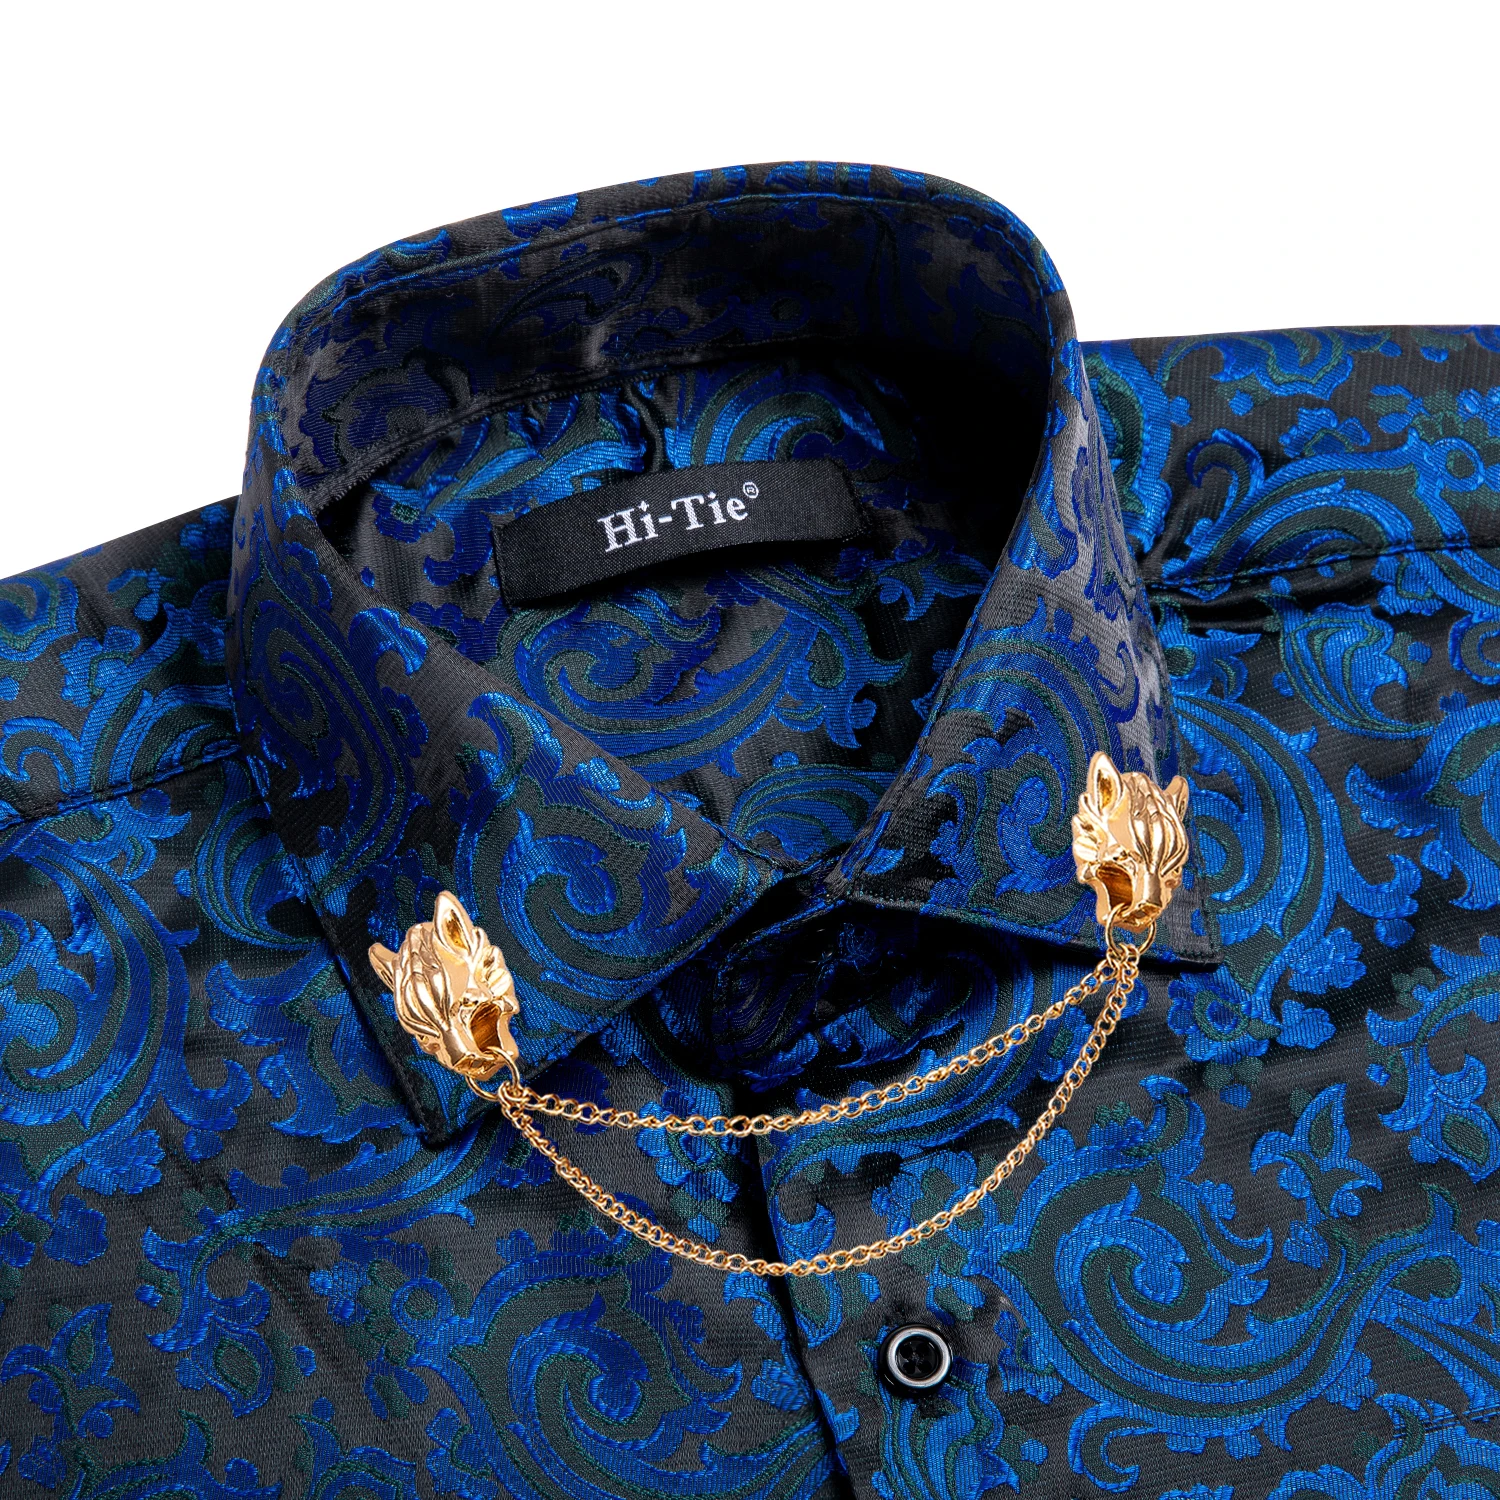 Formal Blue Black Mens Shirts Silk Spring Autumn Long Sleeve Slim Fit Paisley Jacquard Shirt For Male Business Party Gift Hi-Tie barry wang jacquard silk mens scarf floral paisley stylish burgundy gold green red blue purple for male wedding business party